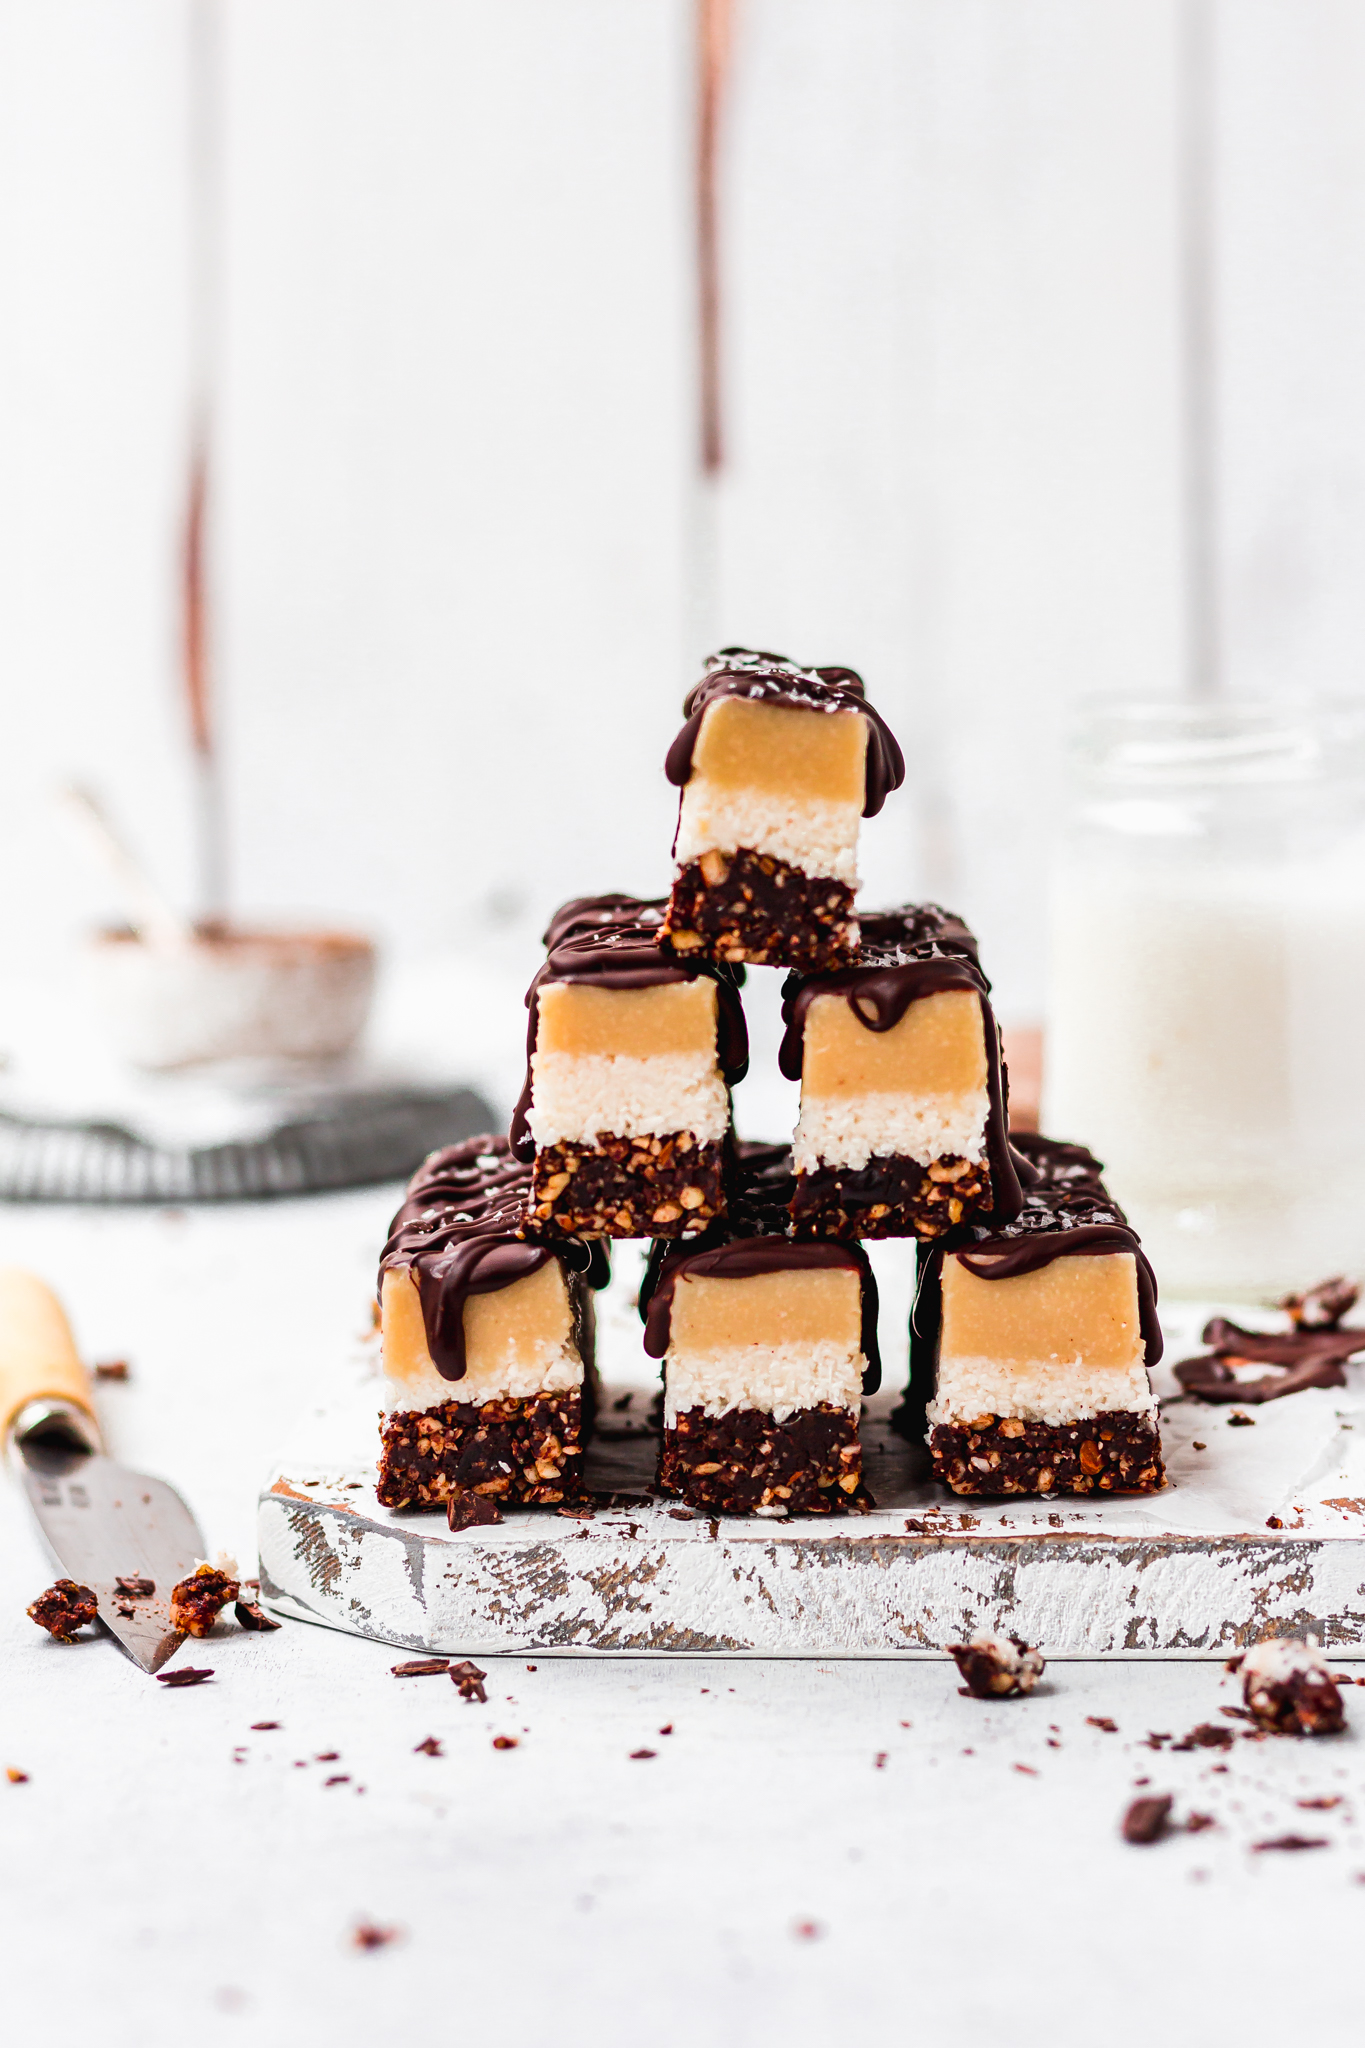 A tower of Salted Chocolate Coconut Caramel Slices